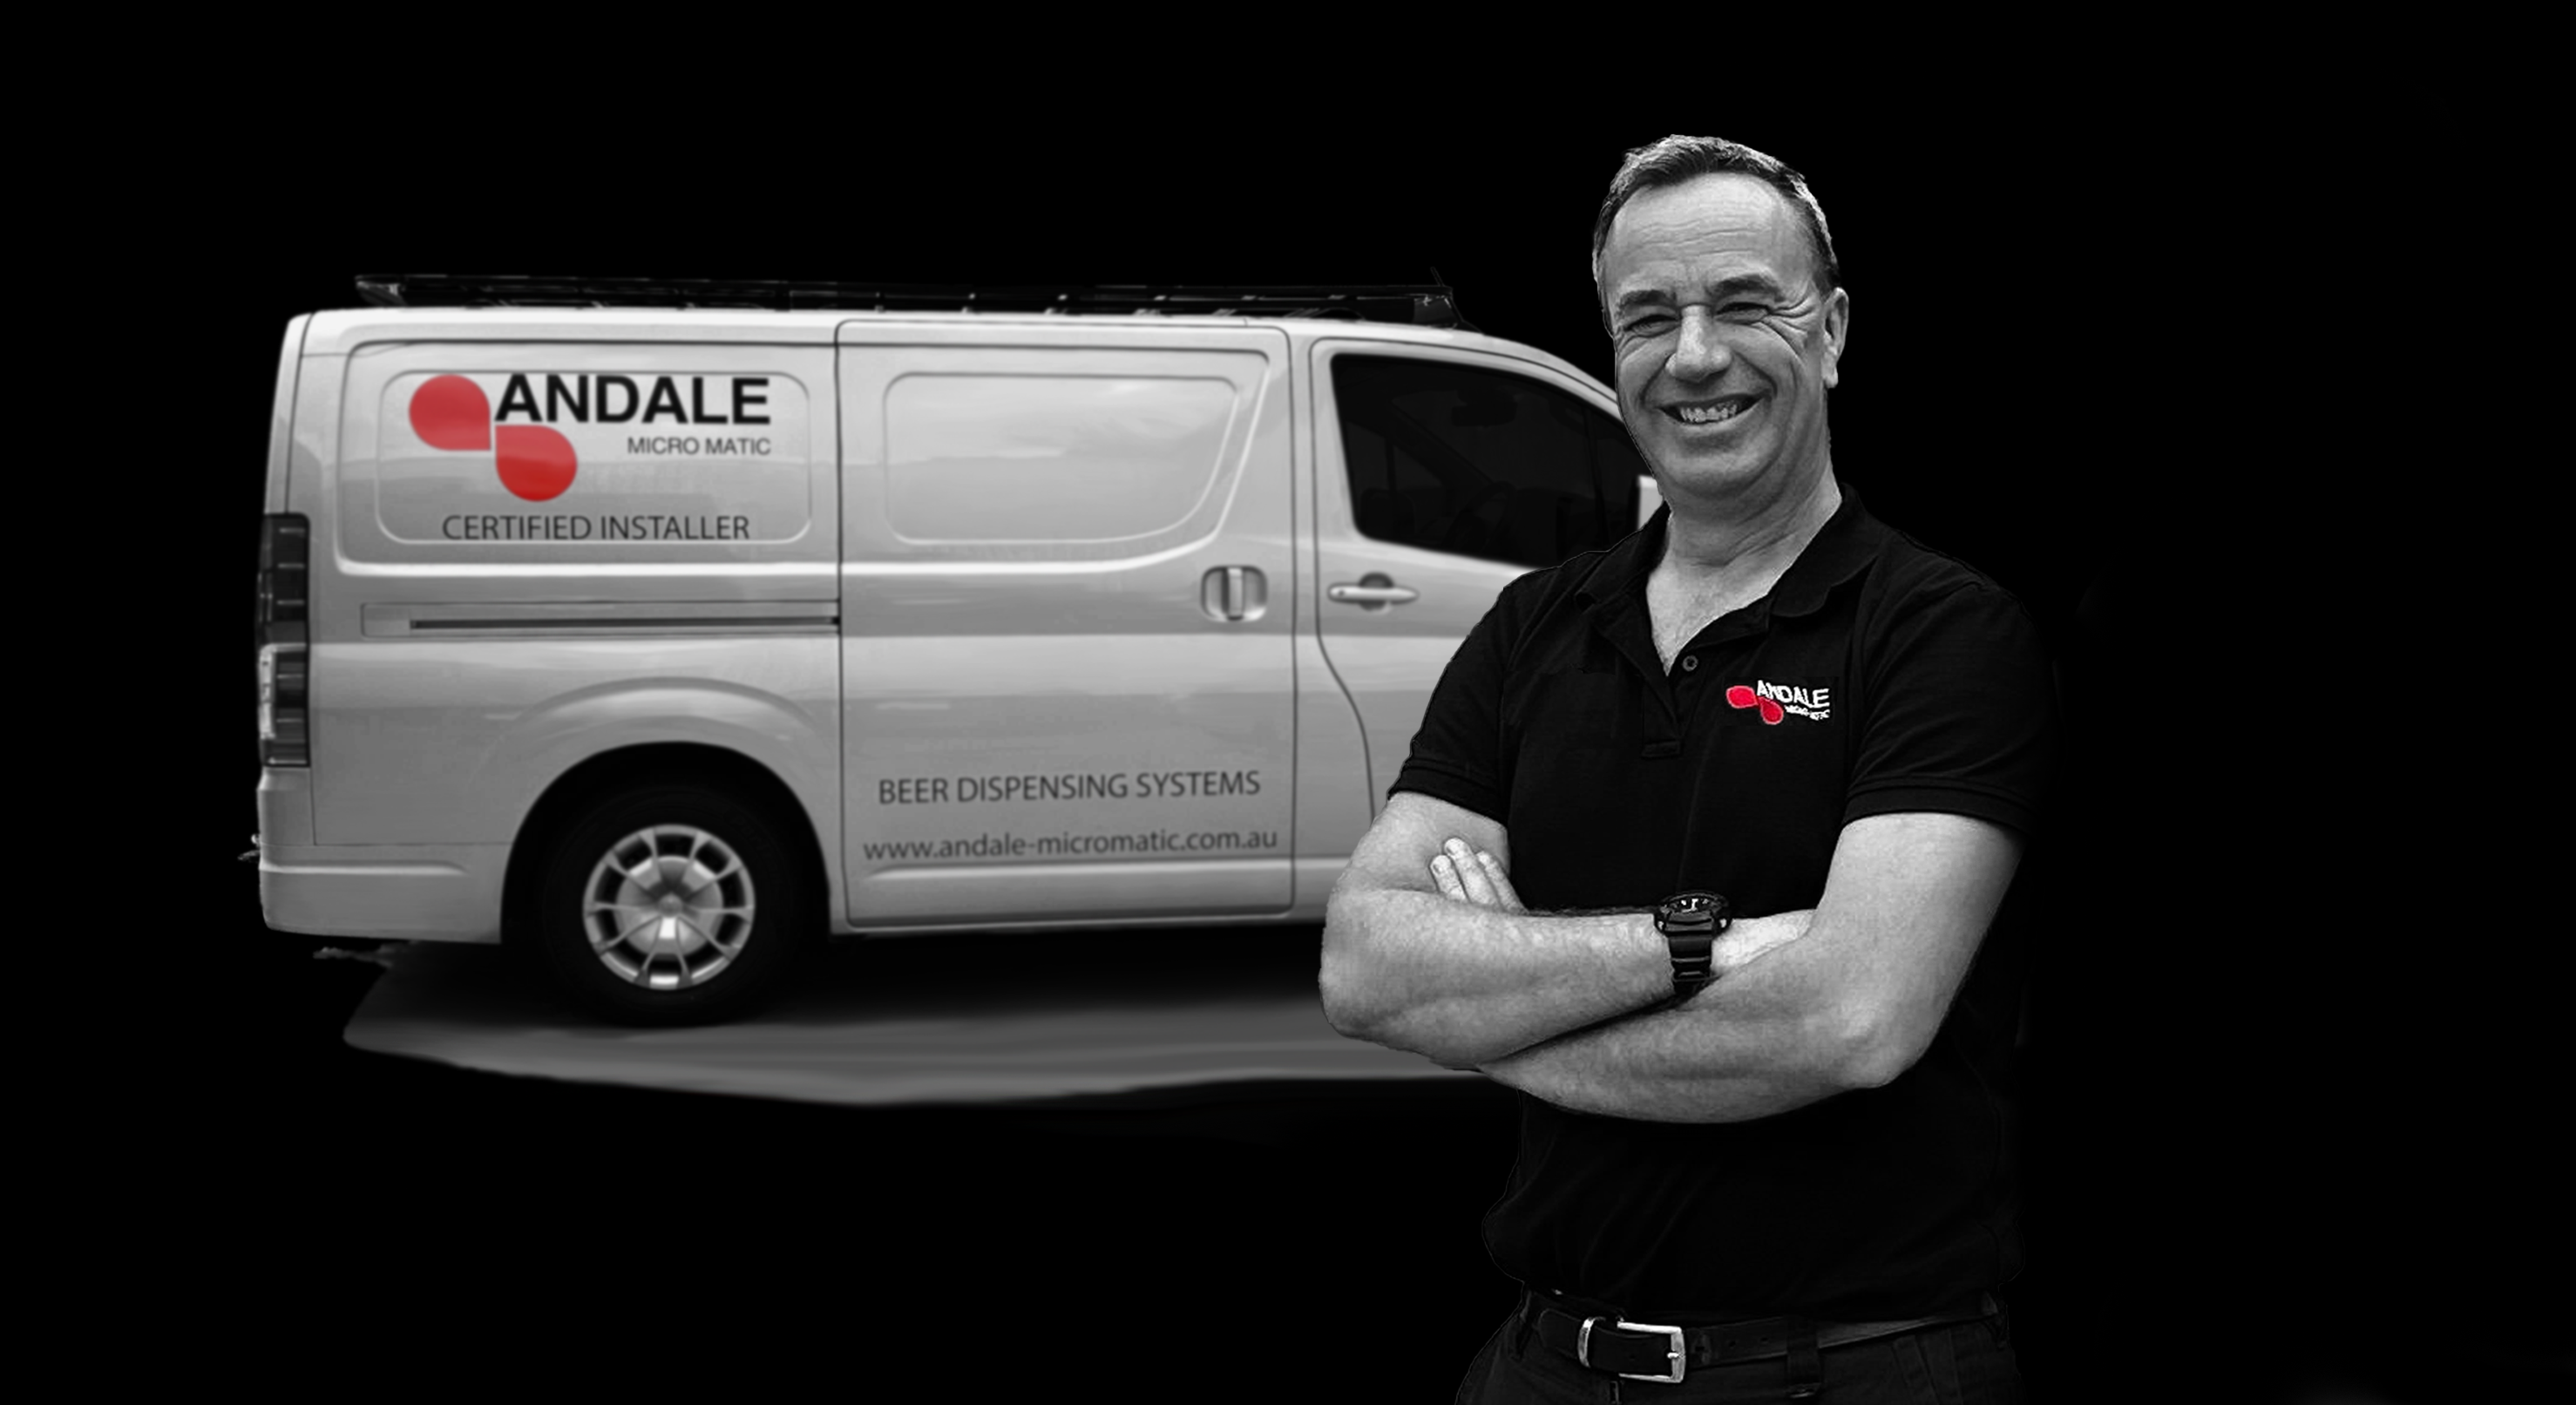 Andale Micro Matic provide industry experts to keep your system up and running. Get your 3 month and 6 monthly services taken care of by the professionals at Andale Micro Matic